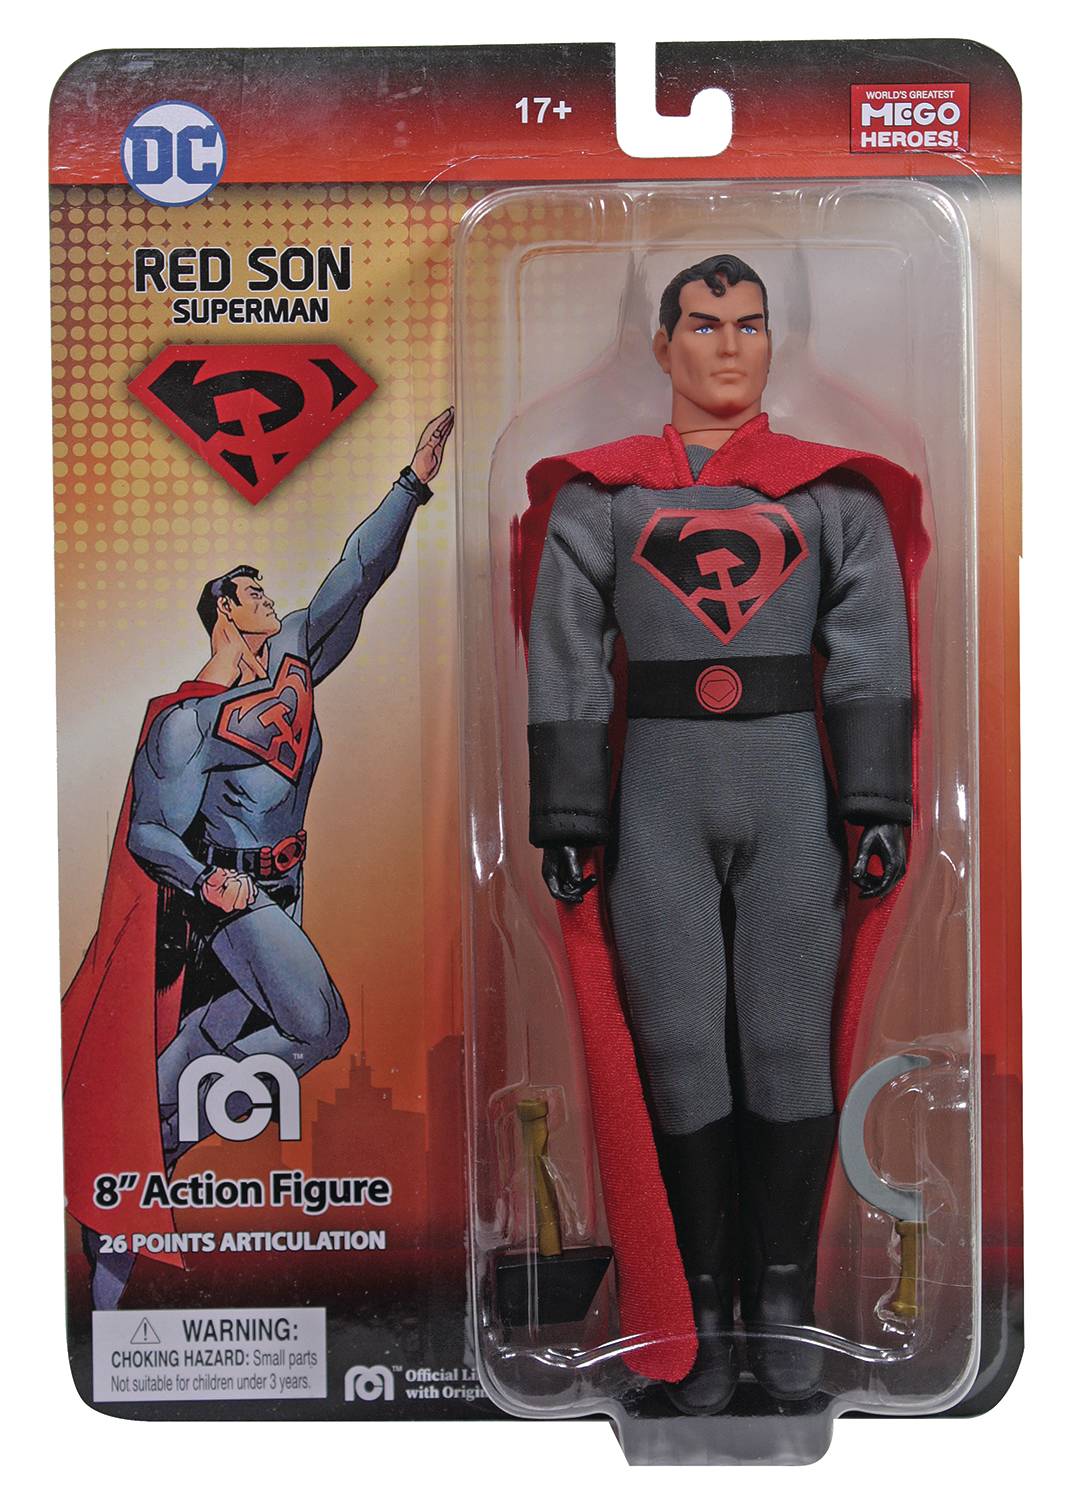 Damaged Package MEGO DC Red Sun Superman 8" Action Figure (PX Previews Exclusive)